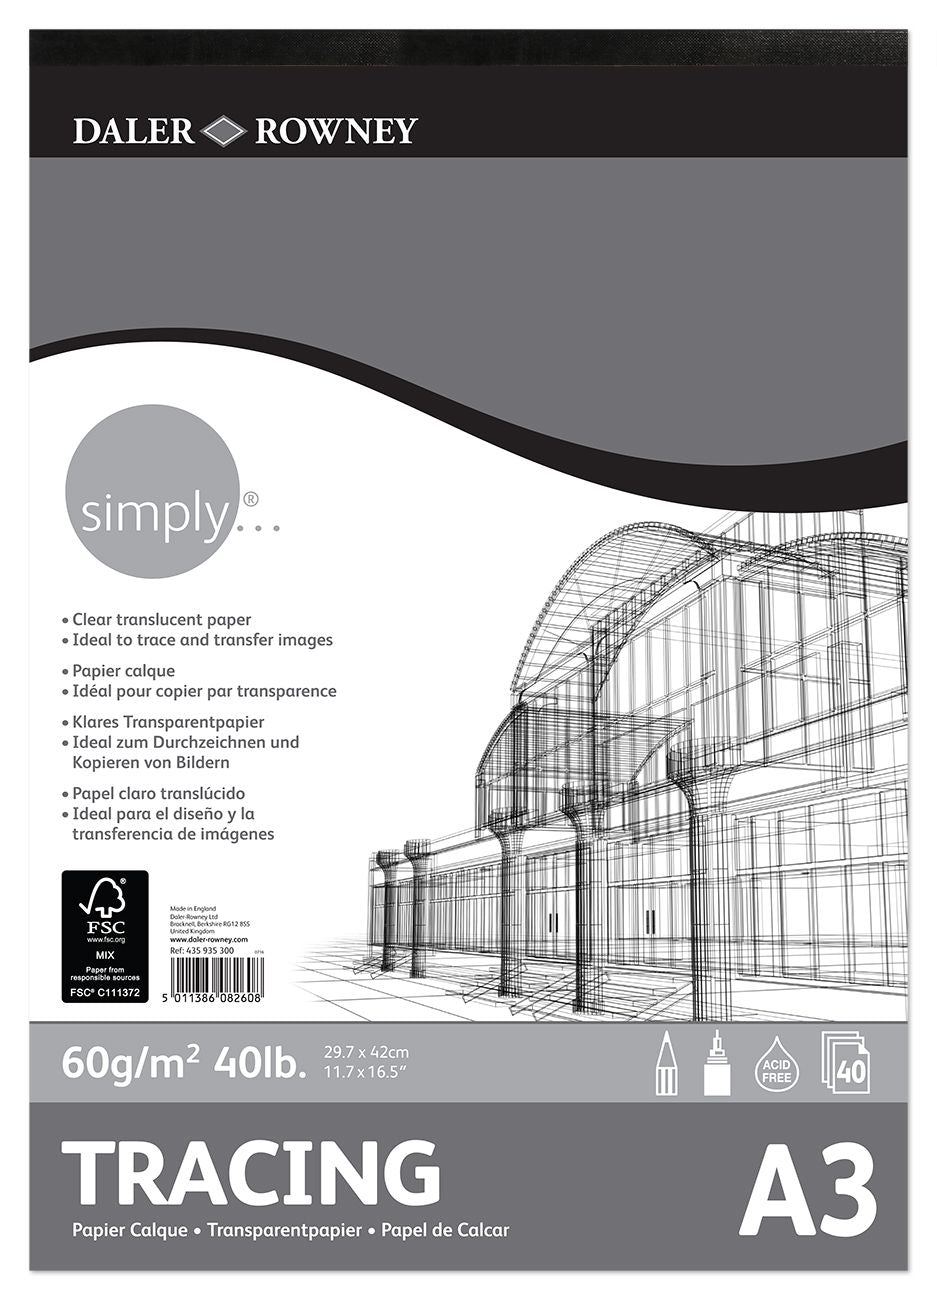 Daler Rowney Simply Tracing Paper Pad A3 60gsm 40 sheetsDaler Rowney Simply Tracing Paper Pad A3 60gsm 40 sheets